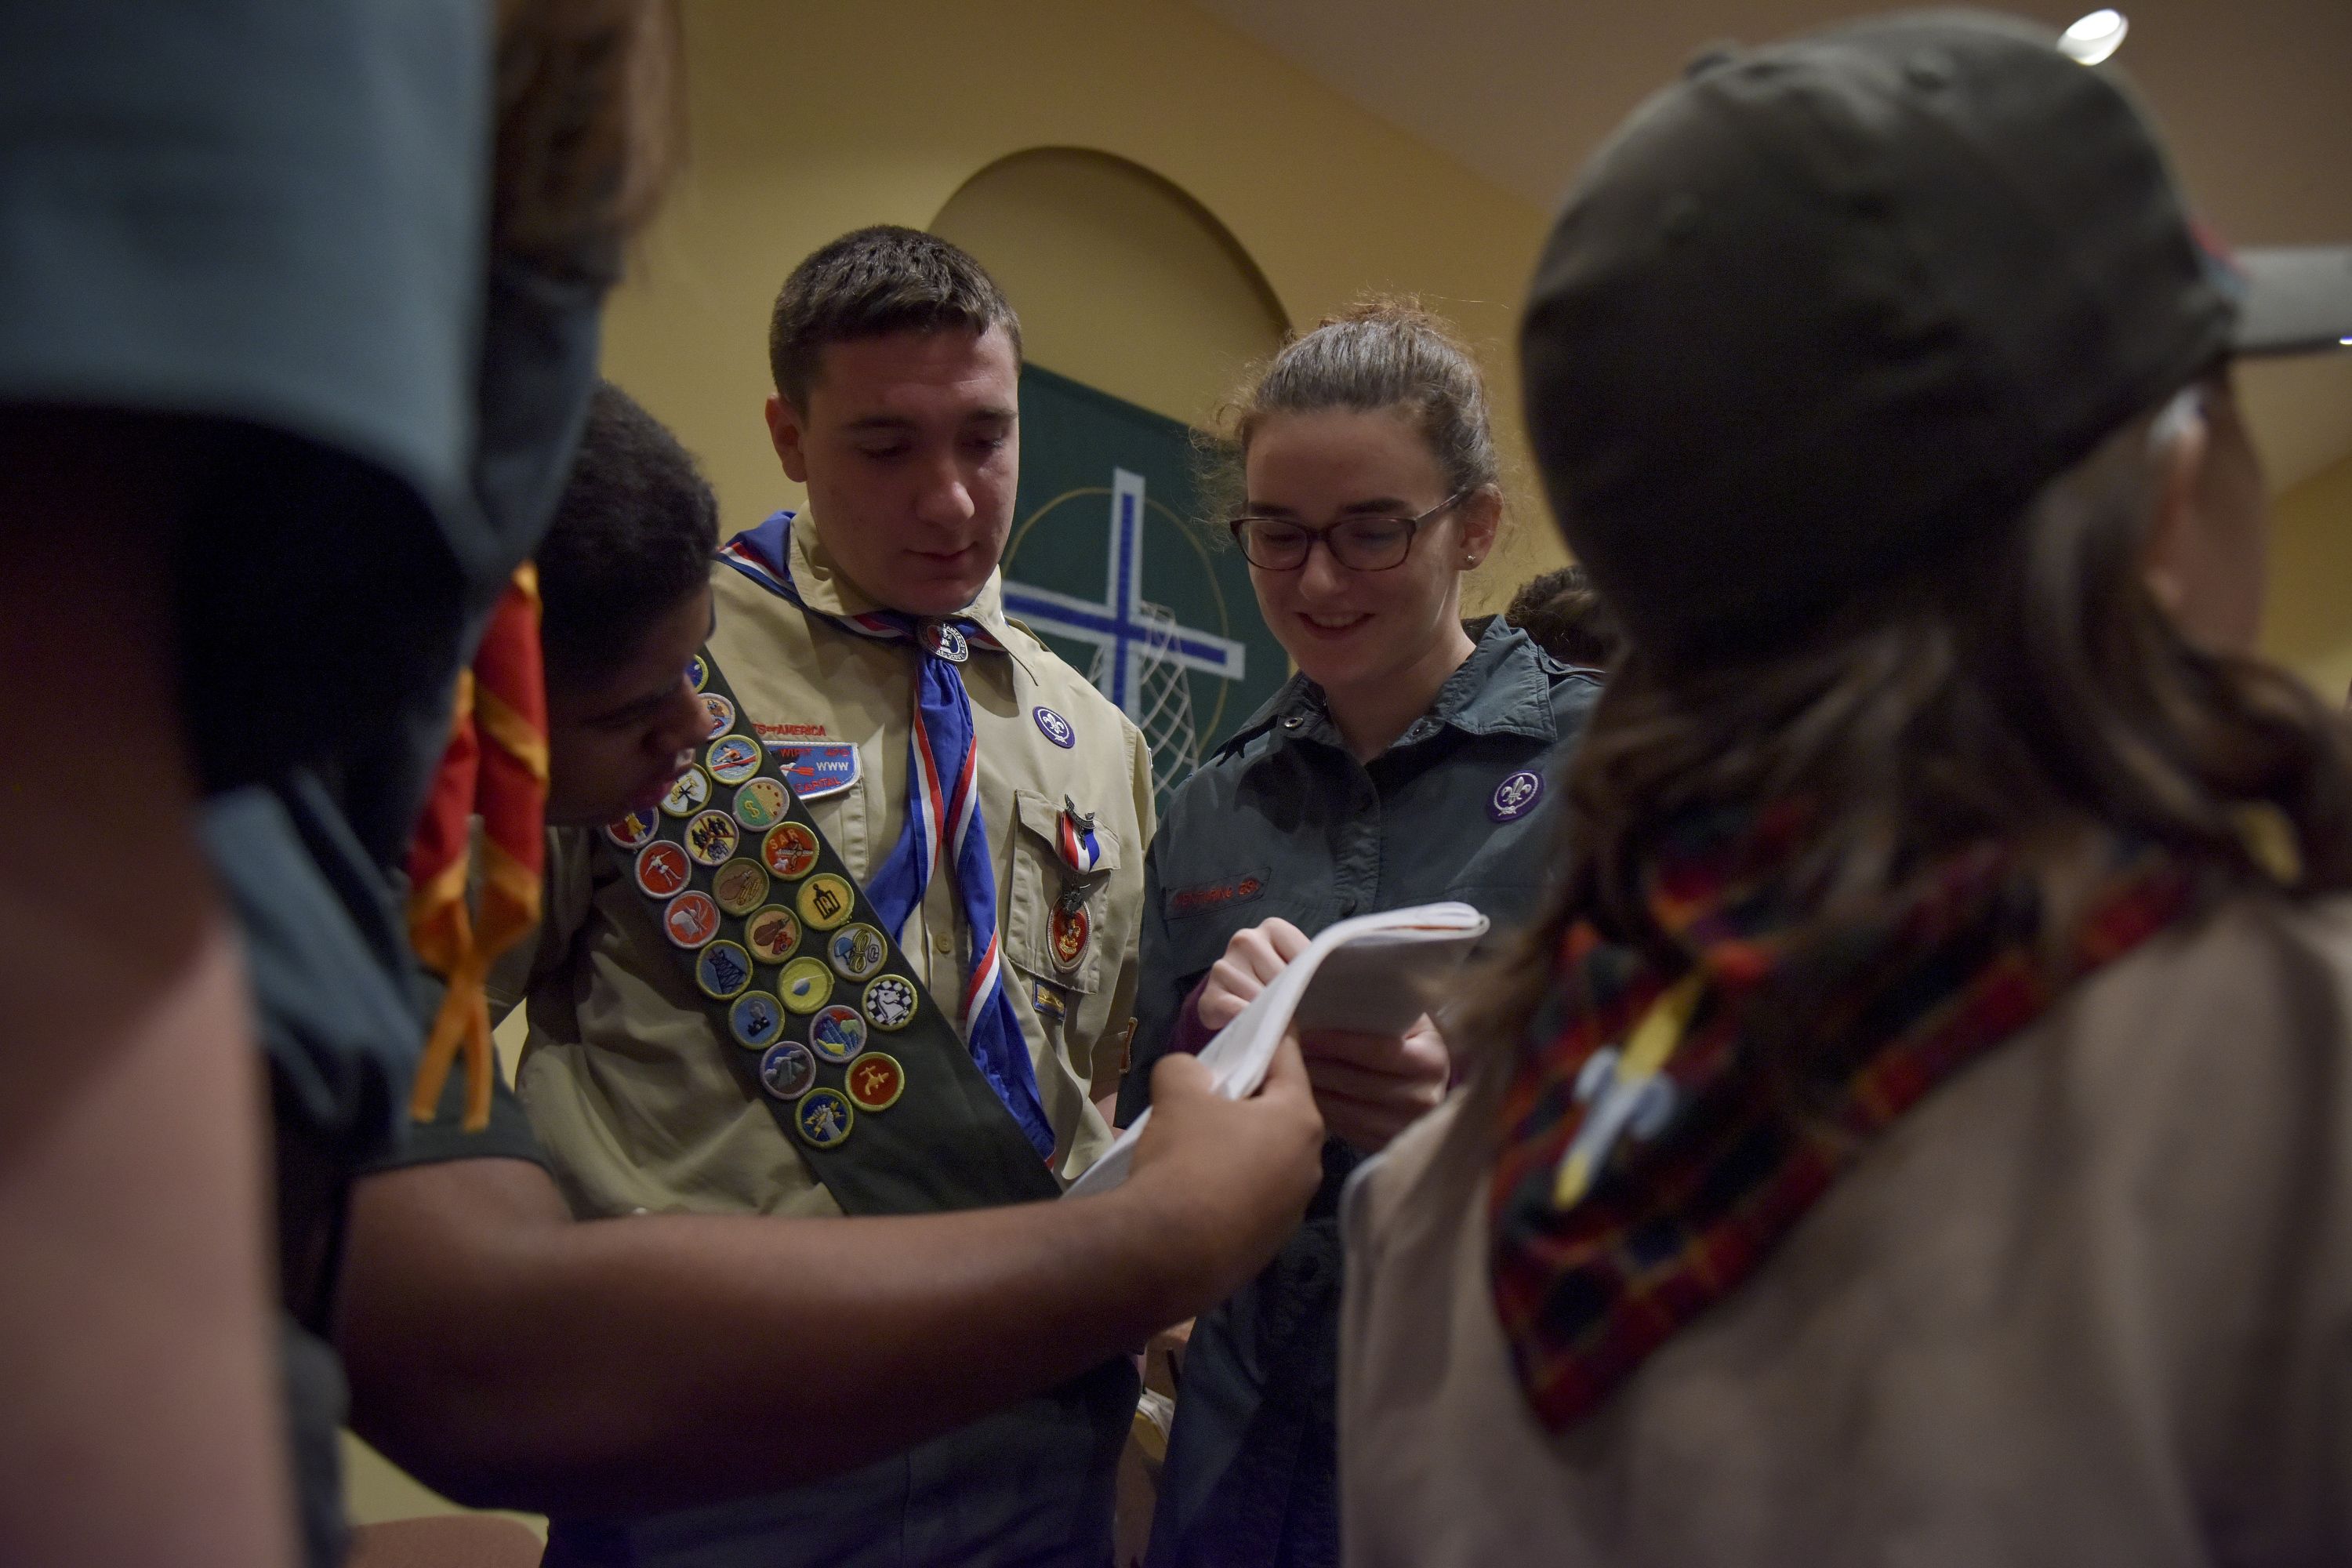 What's the difference between the Girl Scouts and the Boy Scouts